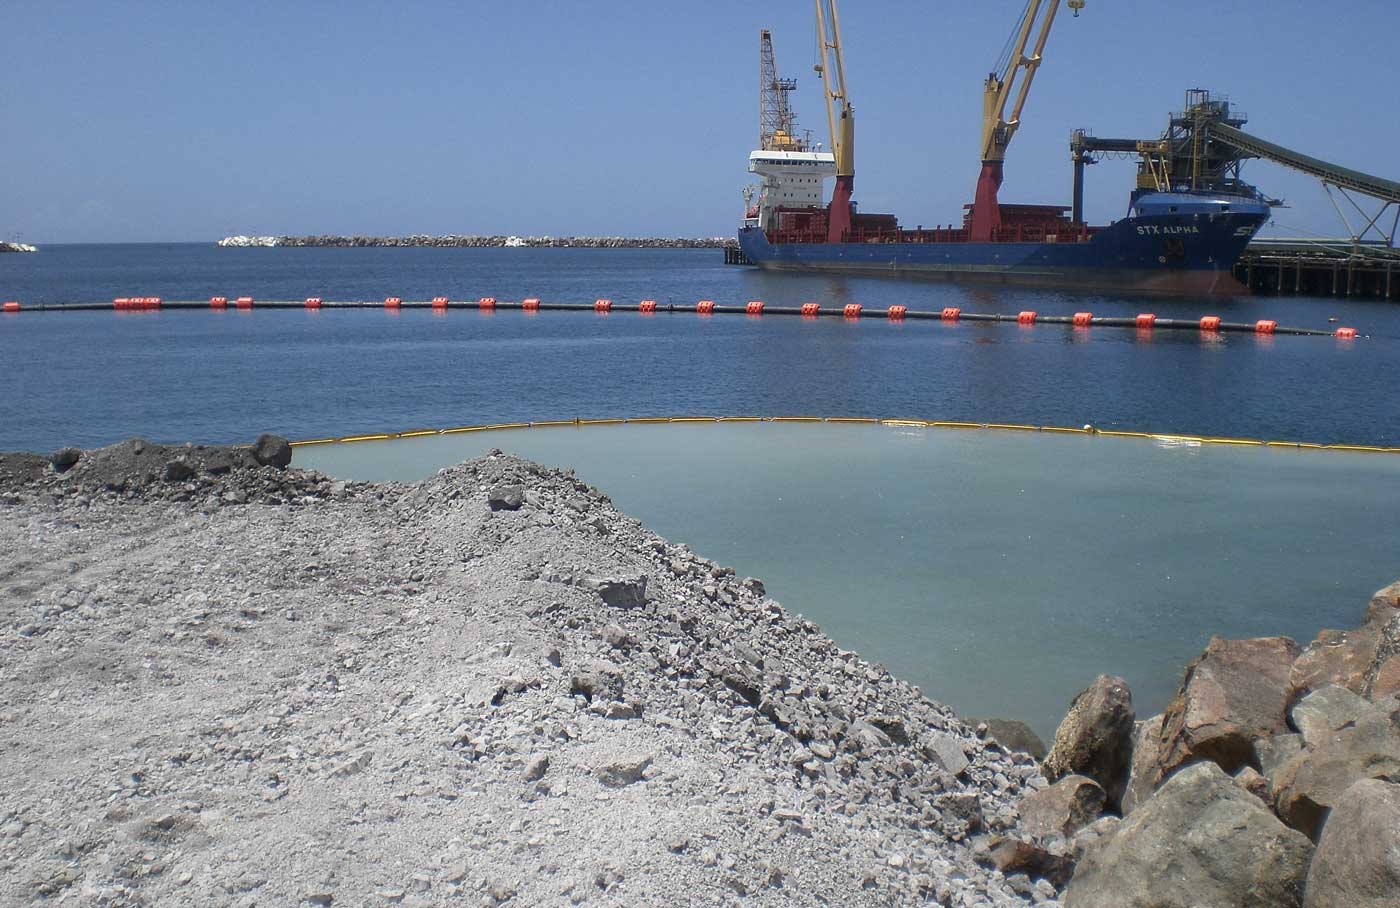 pirmary containment Silt Curtain for dredging and reclamation in Port Kembla. Environmental Compliance for Marine Construction